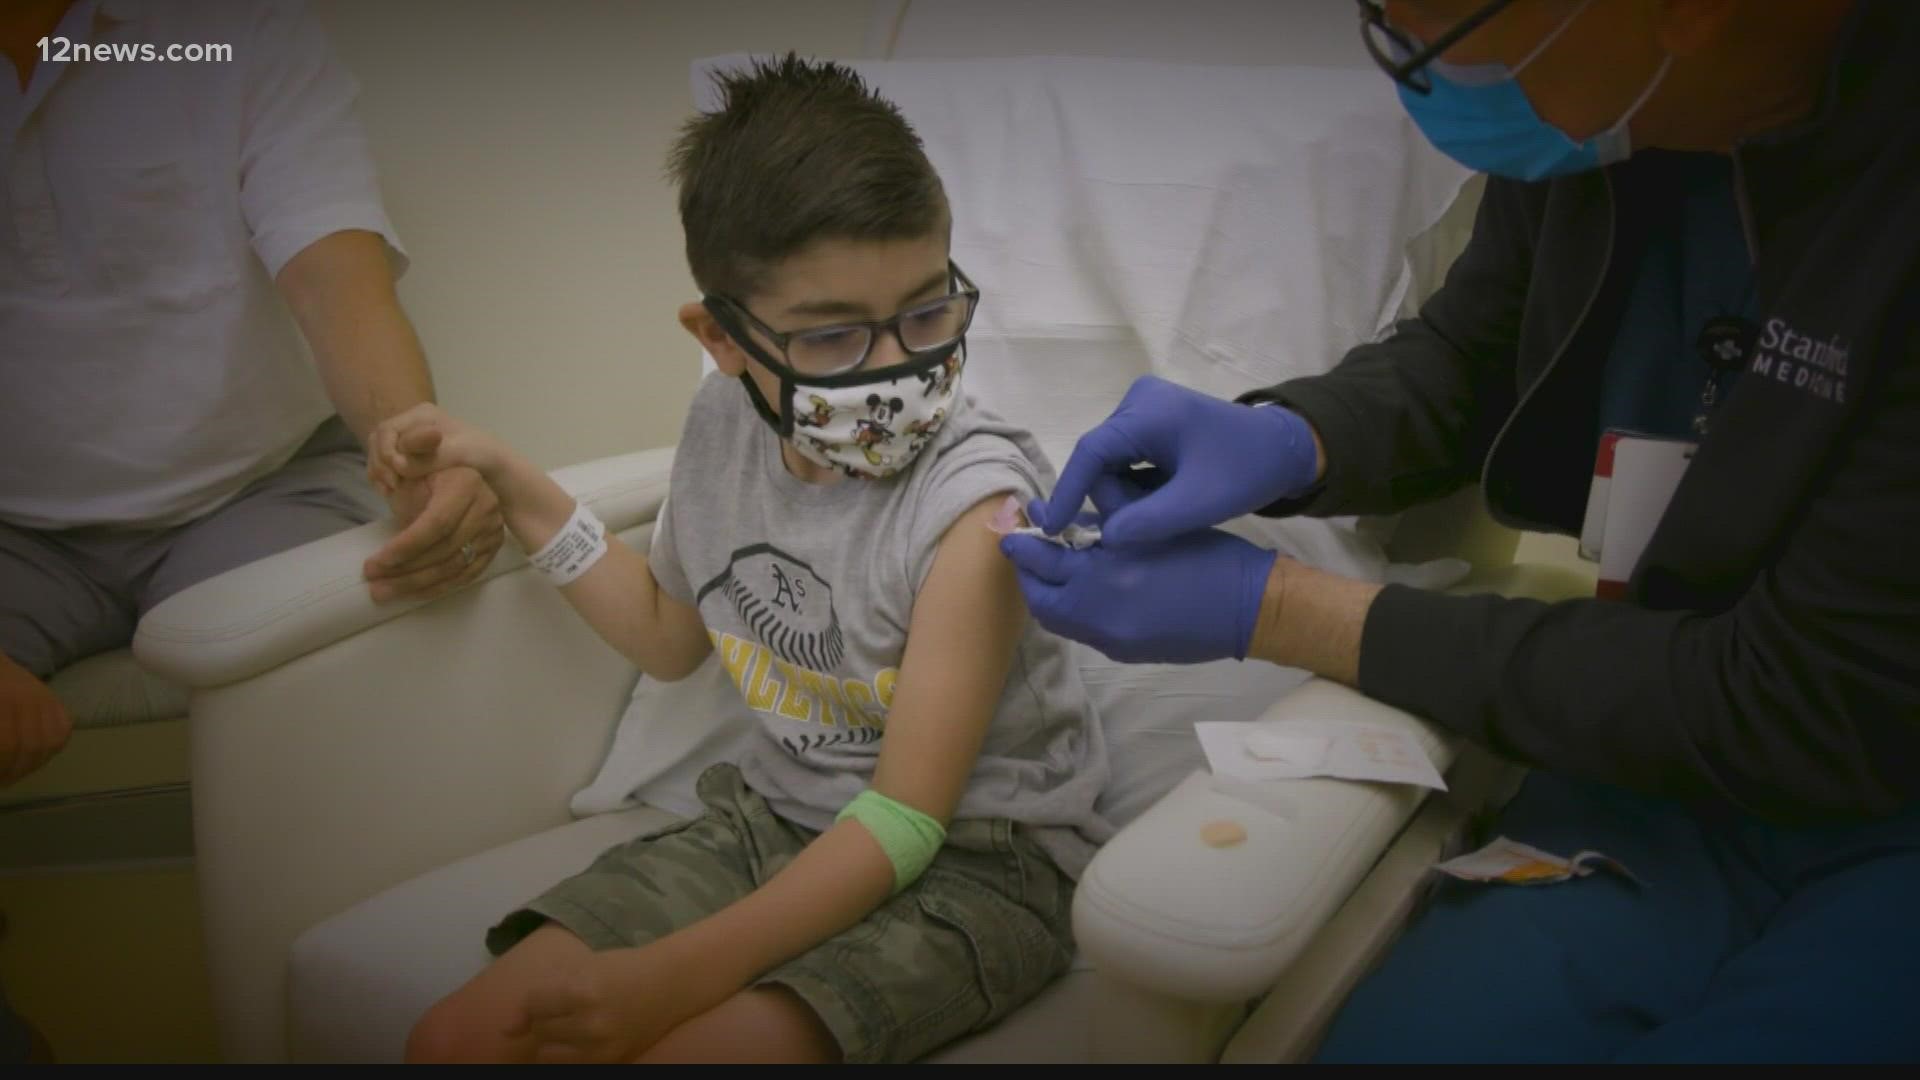 Kids in Arizona and across the country could get their first COVID shots as soon as November. Here's what parents need to know about vaccinating their children.